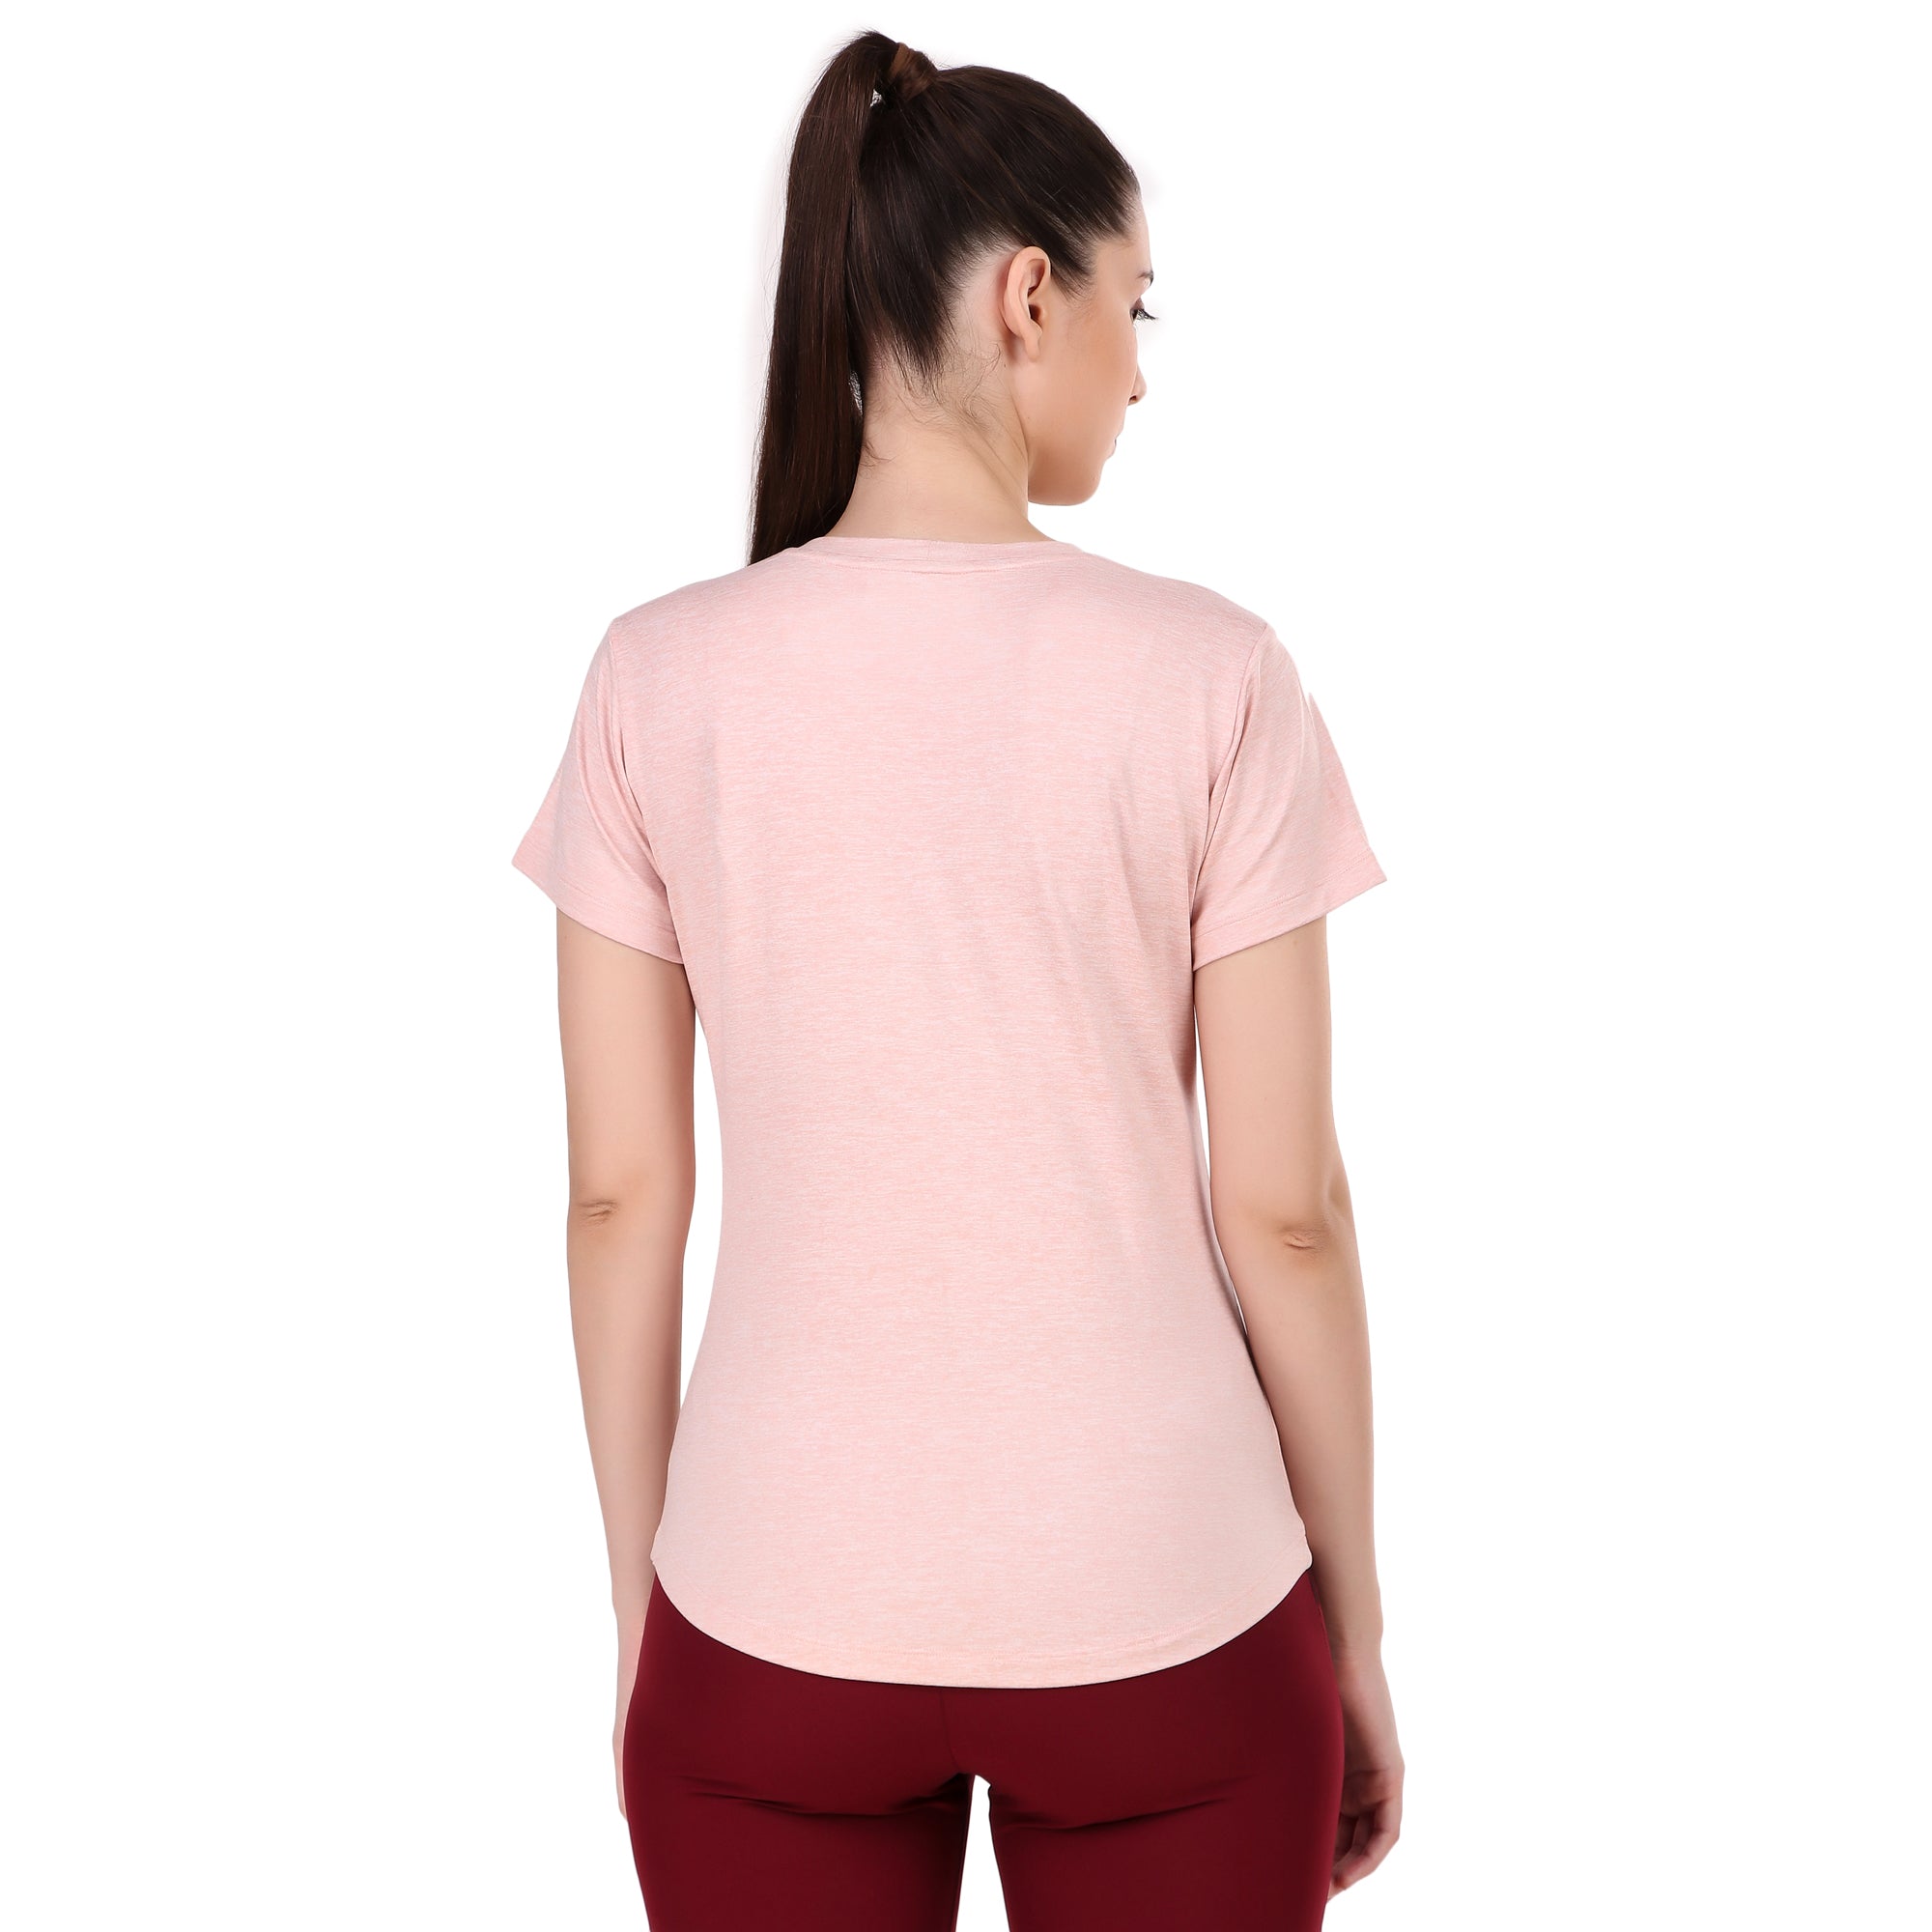 Performance Tshirt For Fearless Women (Pink Heather)